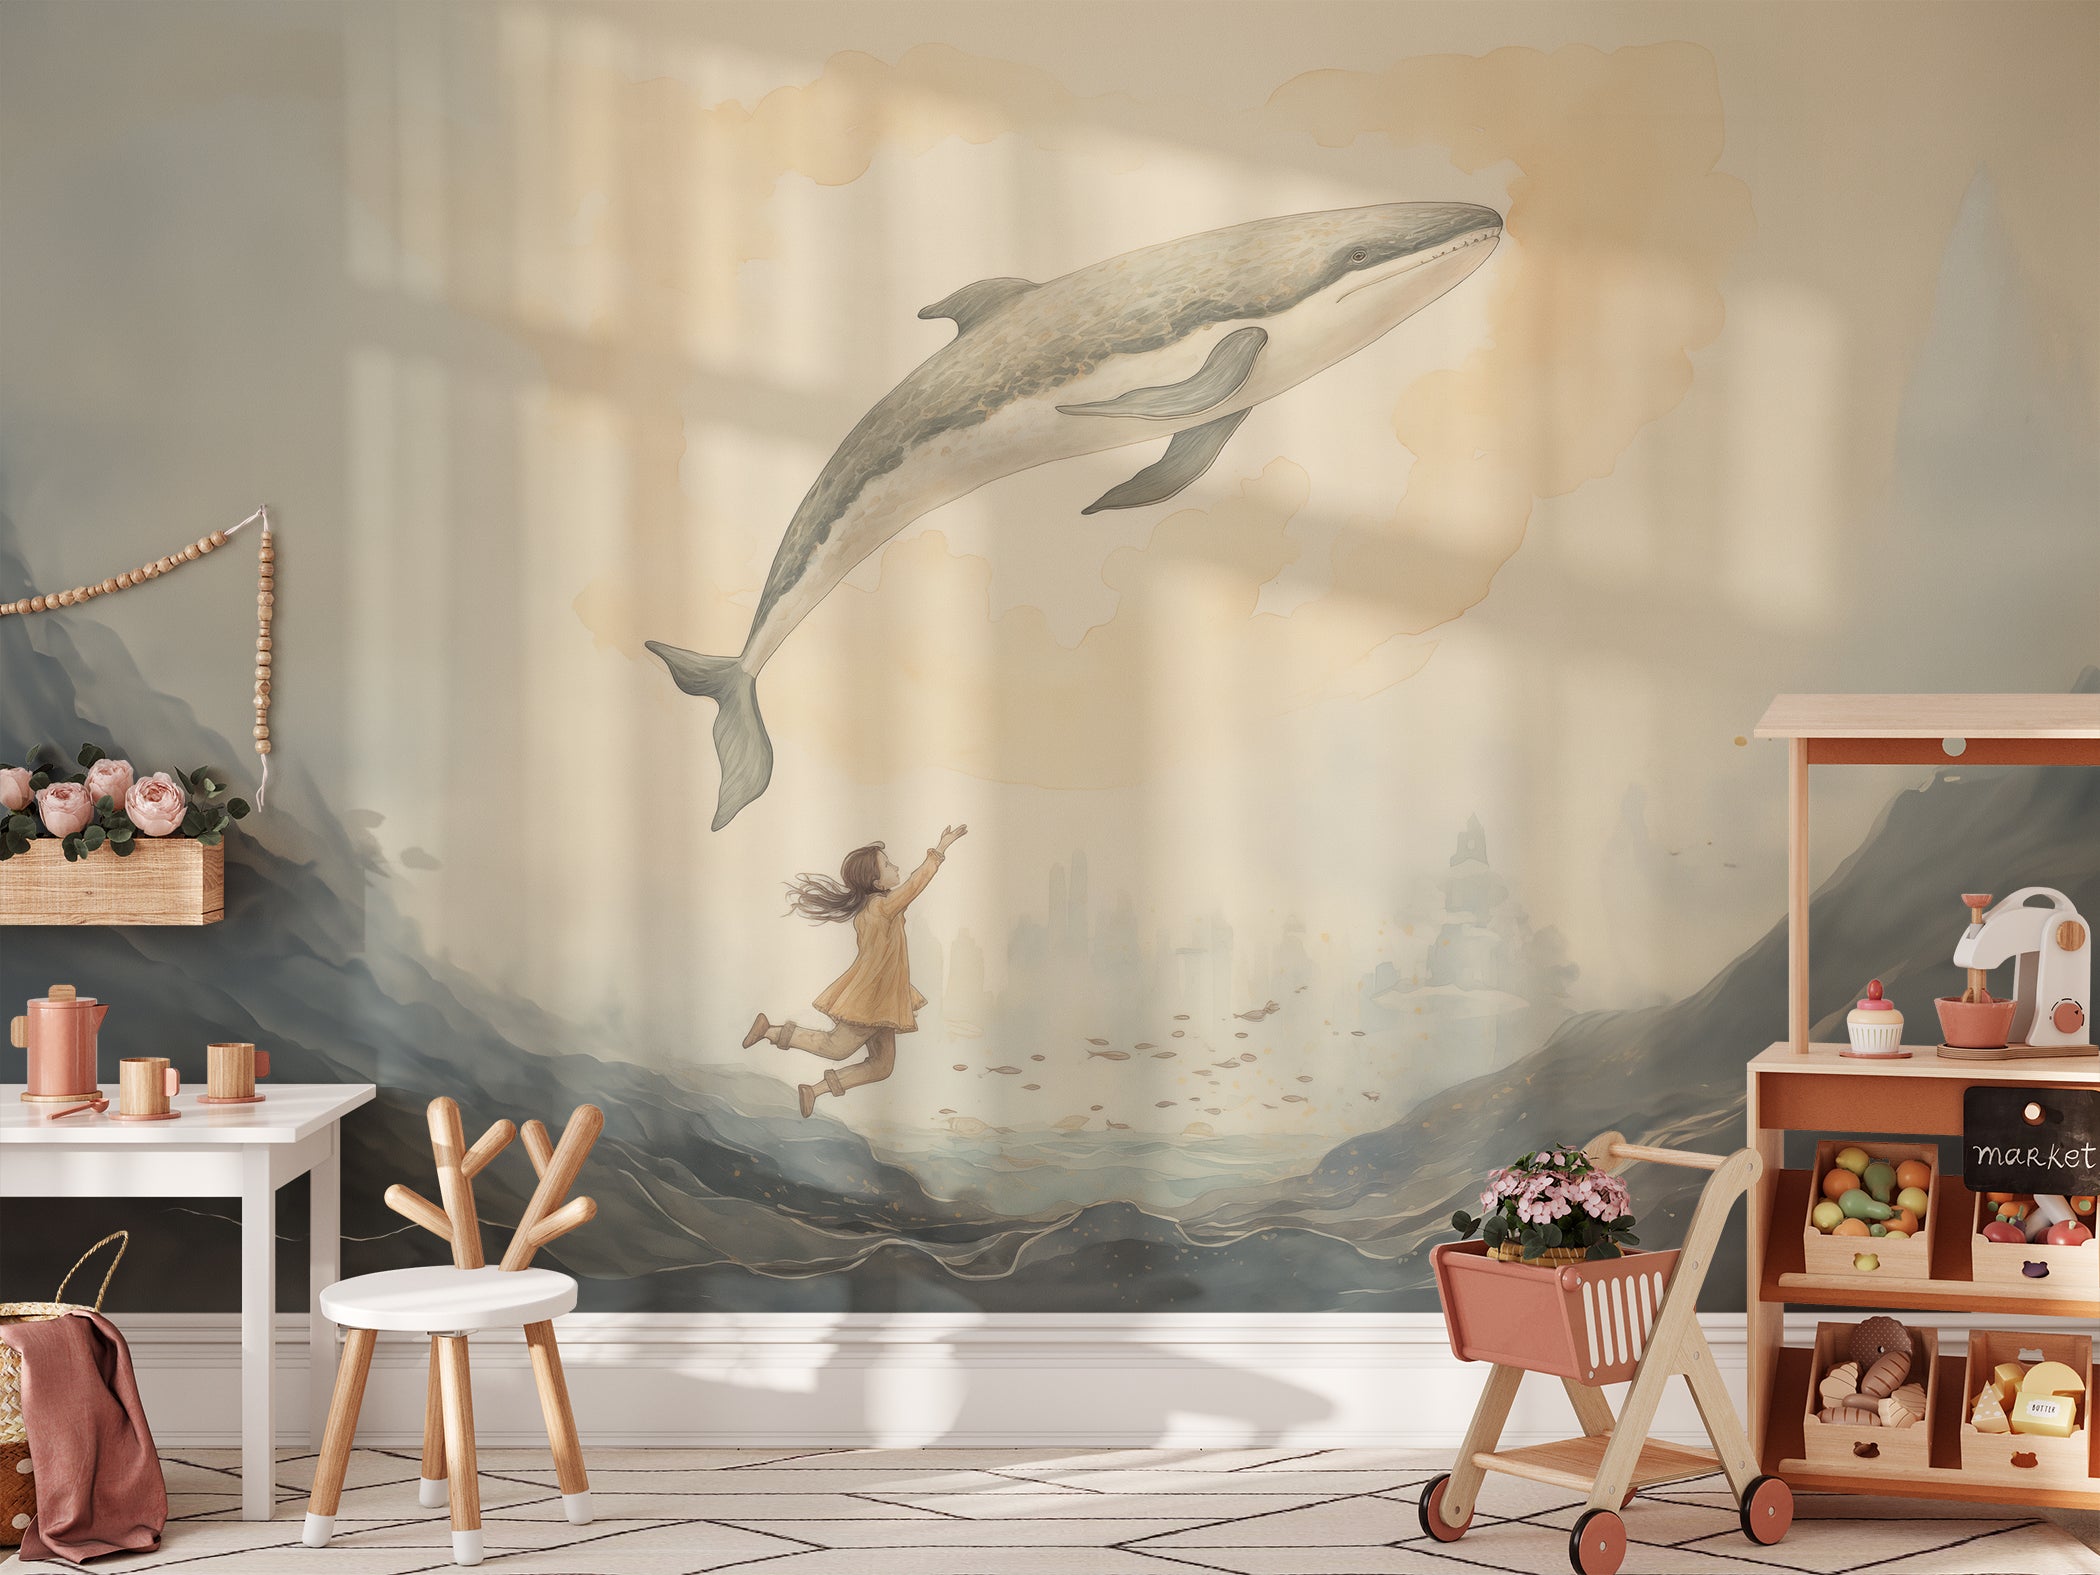 "Illustrative wallpaper mural 'Willie the Whale Mural' with a child and whale flying over stormy seas."